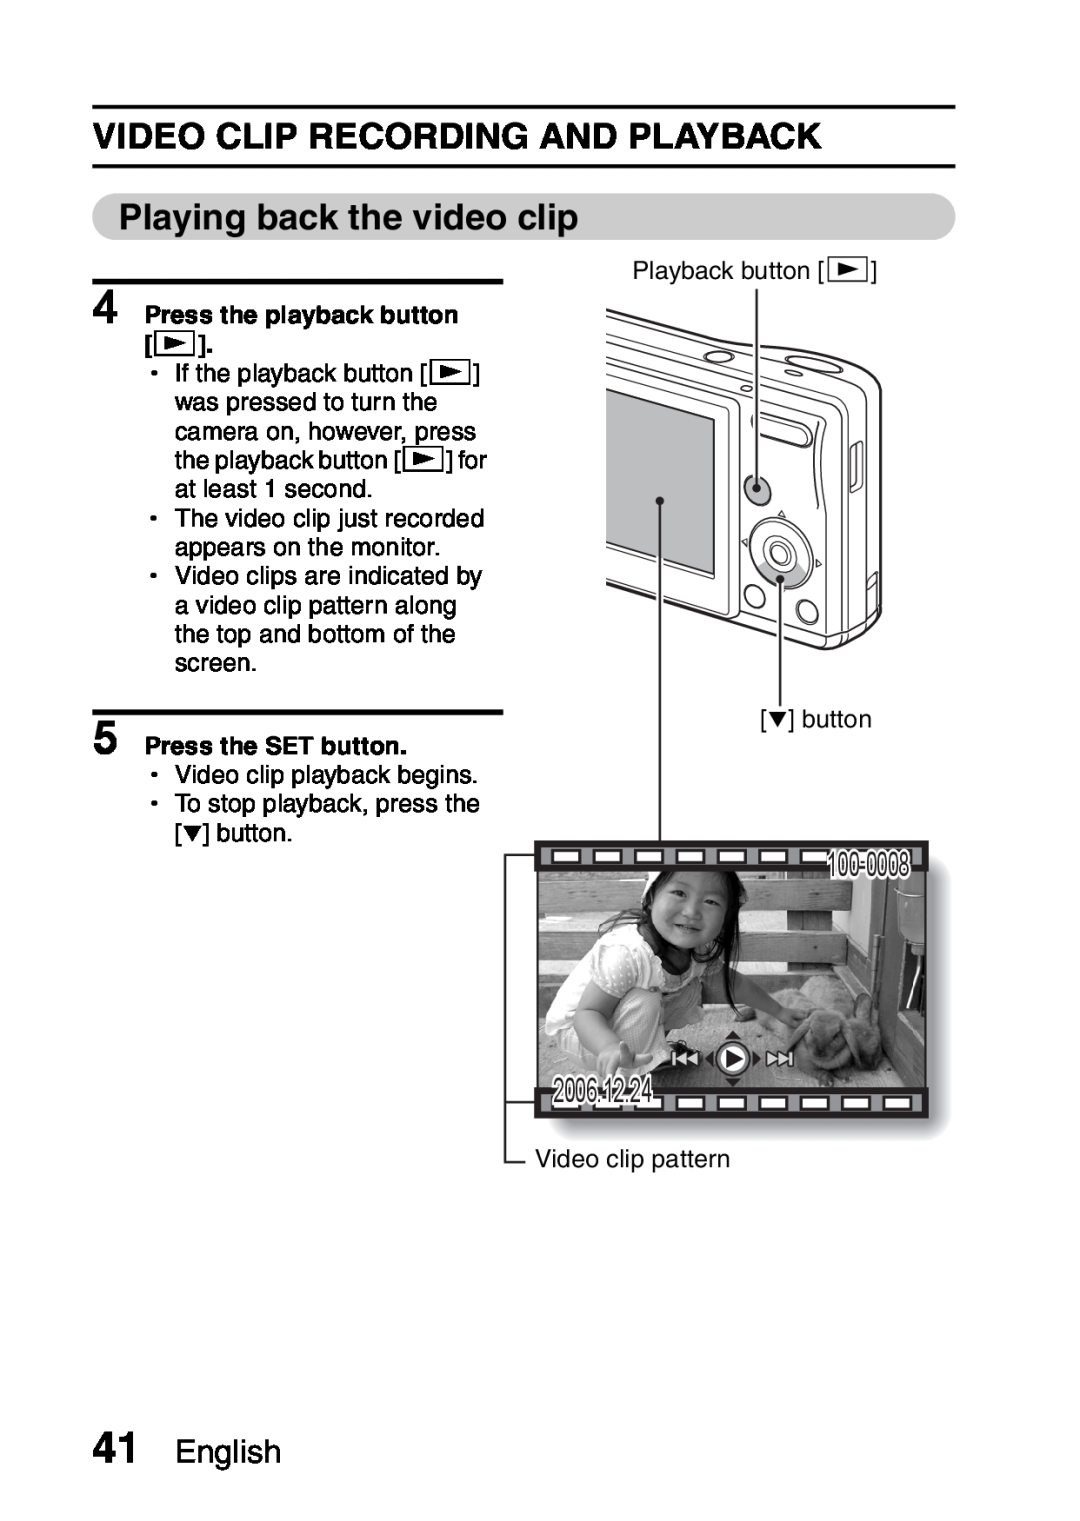 Sanyo VPC-S60 Video Clip Recording And Playback, Playing back the video clip, 2006.12.24, English, Press the SET button 